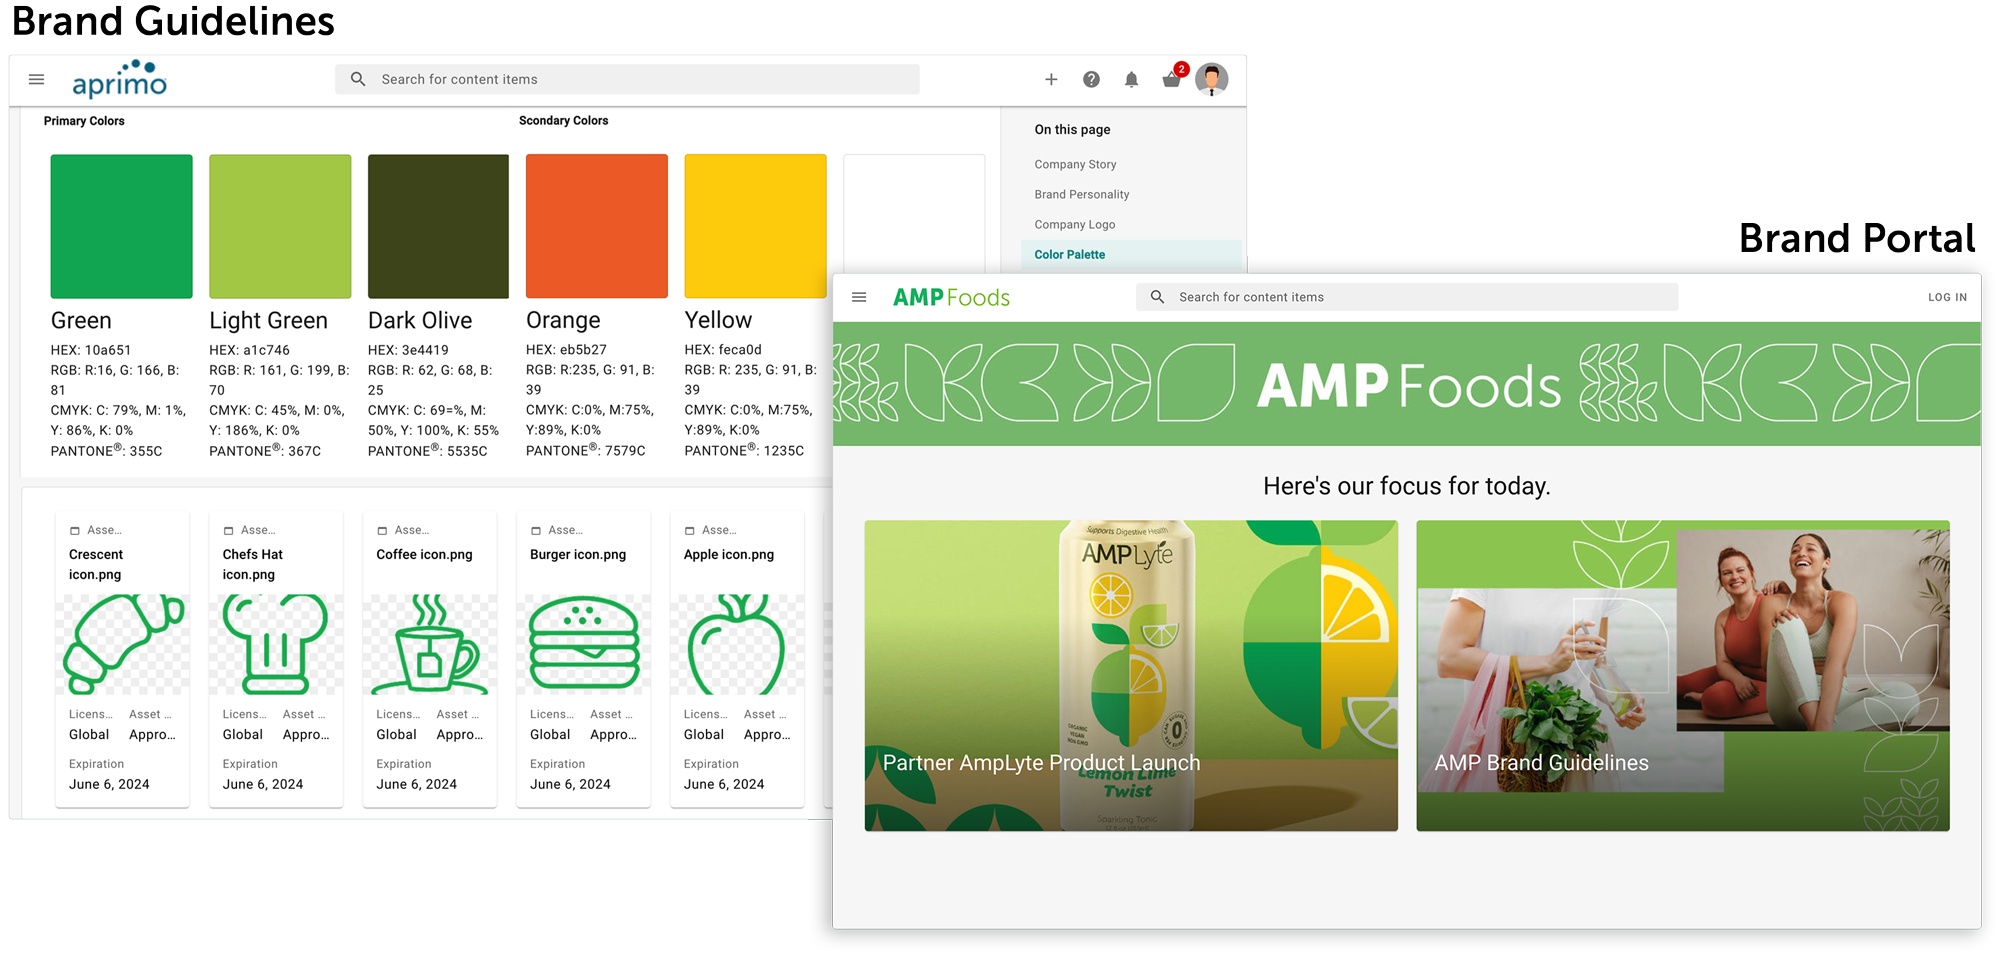 Aprimo Brand Guidelines and Portal CPG